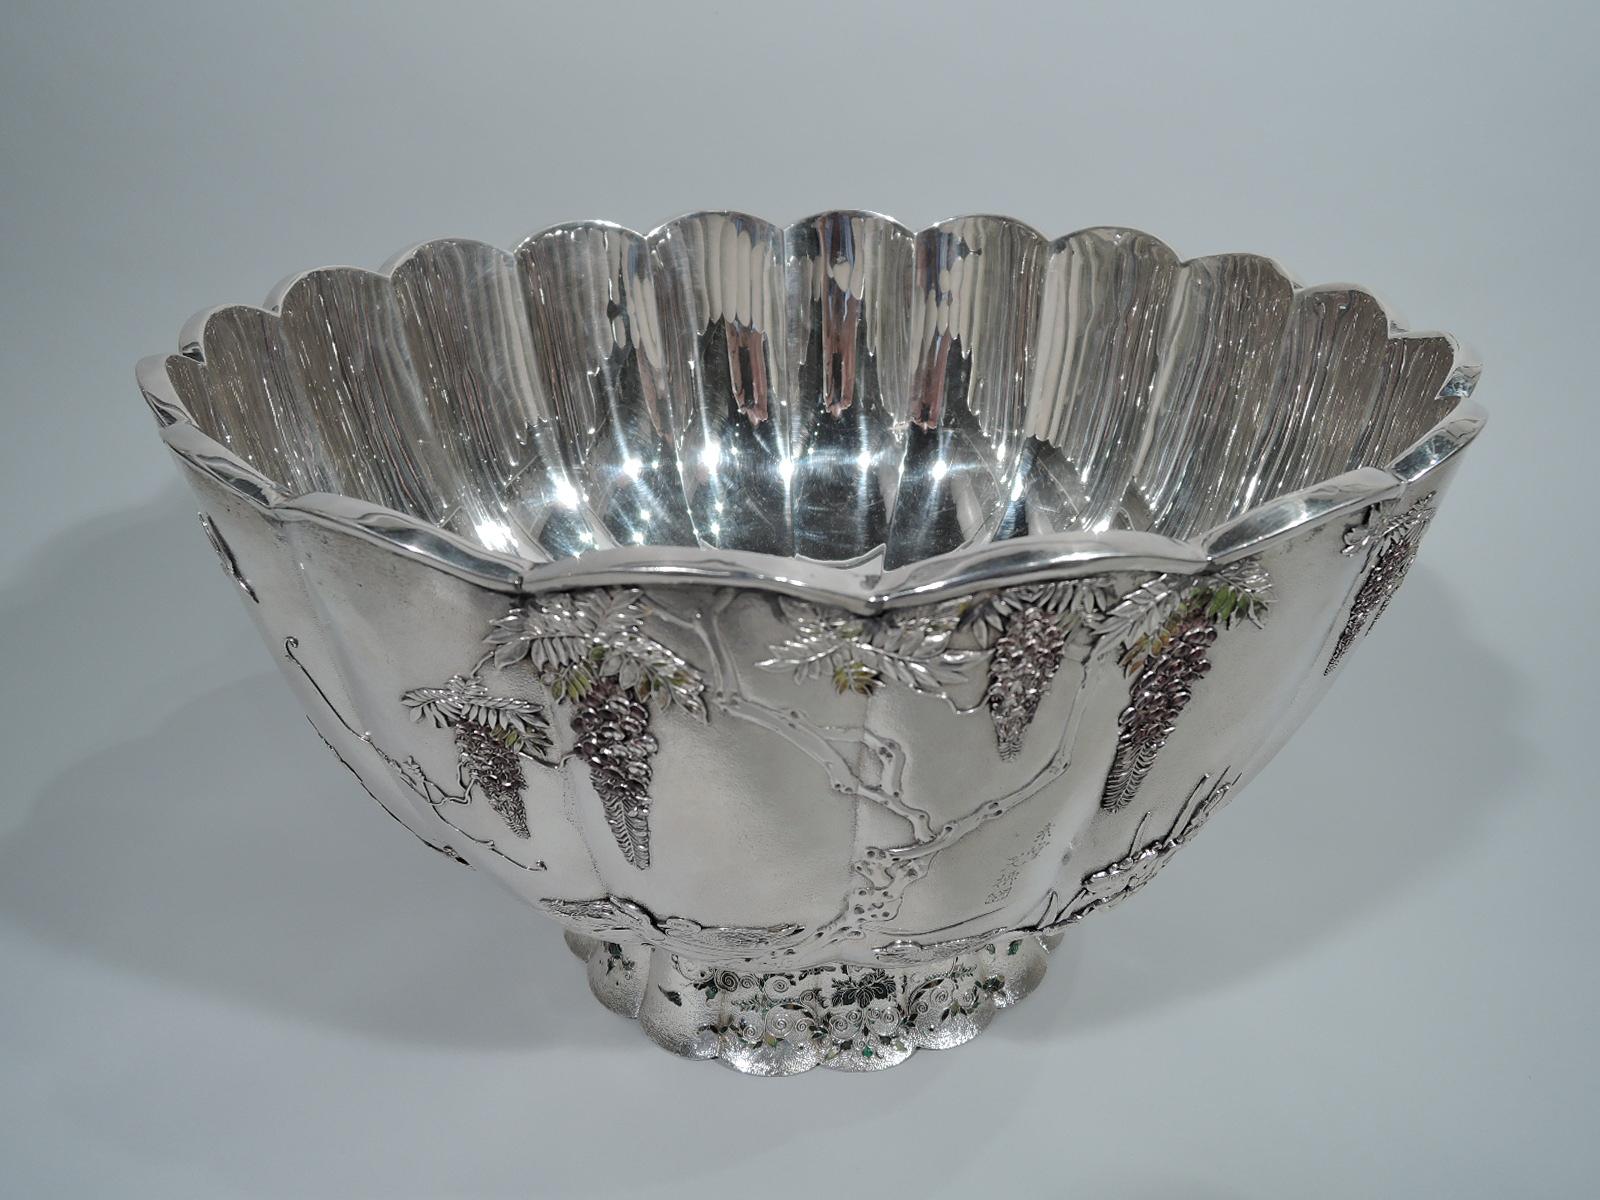 Early 20th Century Antique Japanese Silver and Enamel Centerpiece Bowl wtih World's Fair Provenance